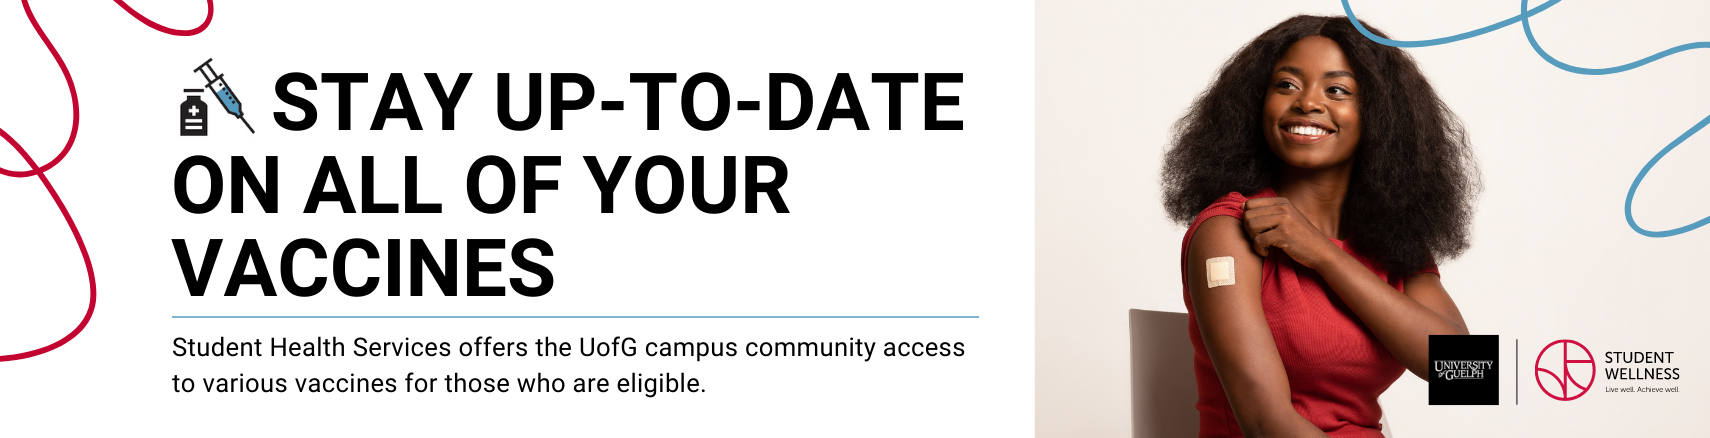 Stay up-to-date on all of your vaccines. Student Health Services offers the UofG campus community access to various vaccines for those who are eligible. 